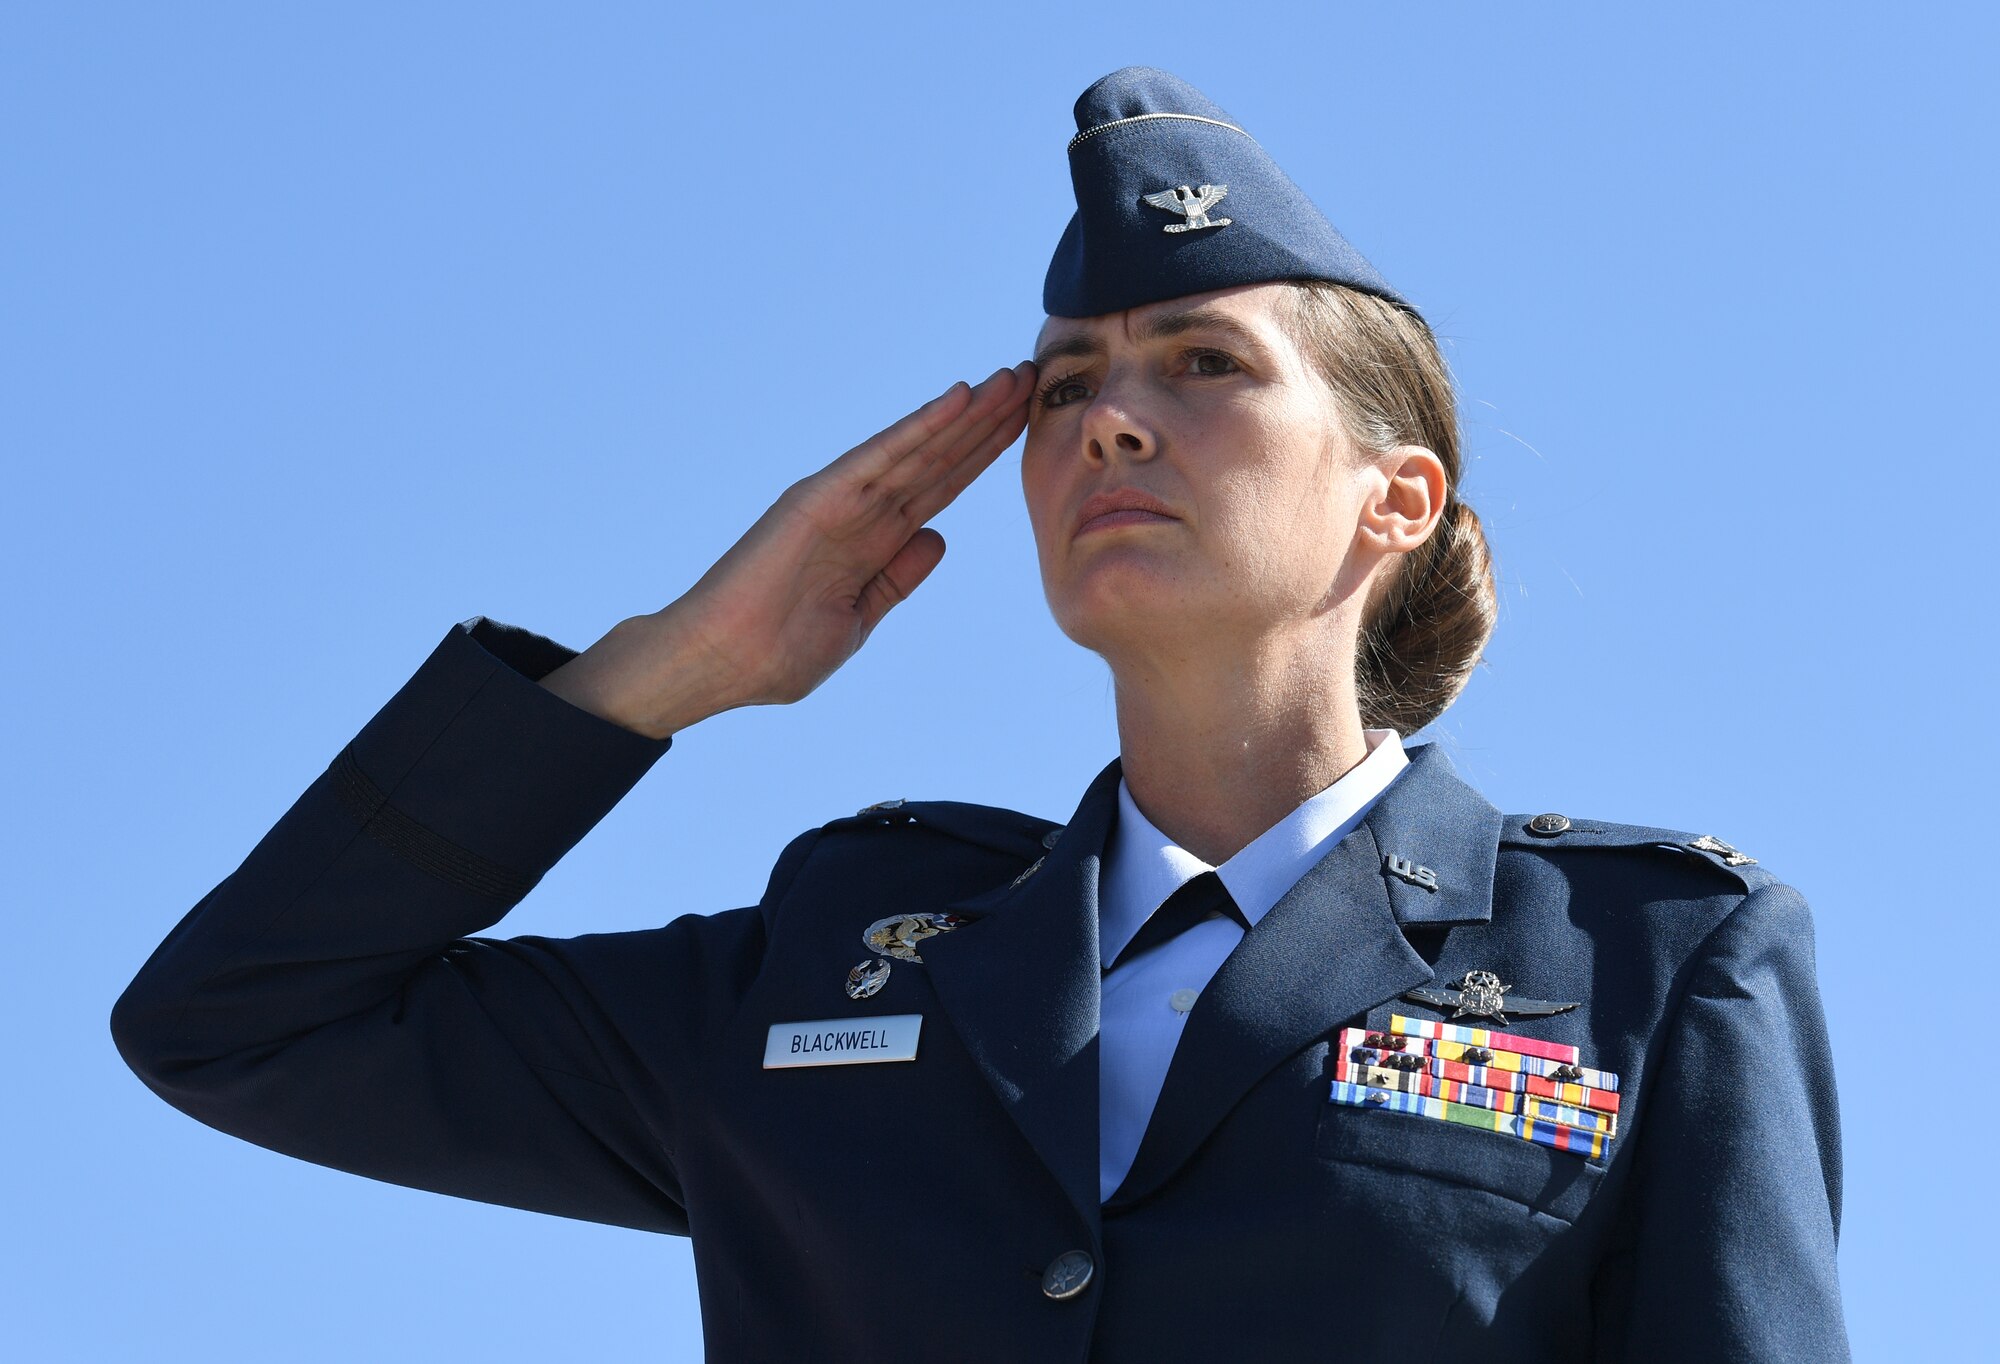 U.S. Air Force Col. Heather Blackwell, 81st Training Wing commander, renders a salute during the 19th Annual Gulf Coast Veterans Day Parade in DíIberville, Mississippi, Nov. 9, 2019. Keesler Air Force Base leadership, along with hundreds of Airmen, attended and participated in the parade in support of all veterans past and present. More than 70 unique floats, marching bands and military units marched in the largest Veterans Day parade on the Gulf Coast. (U.S. Air Force photo by Kemberly Groue)